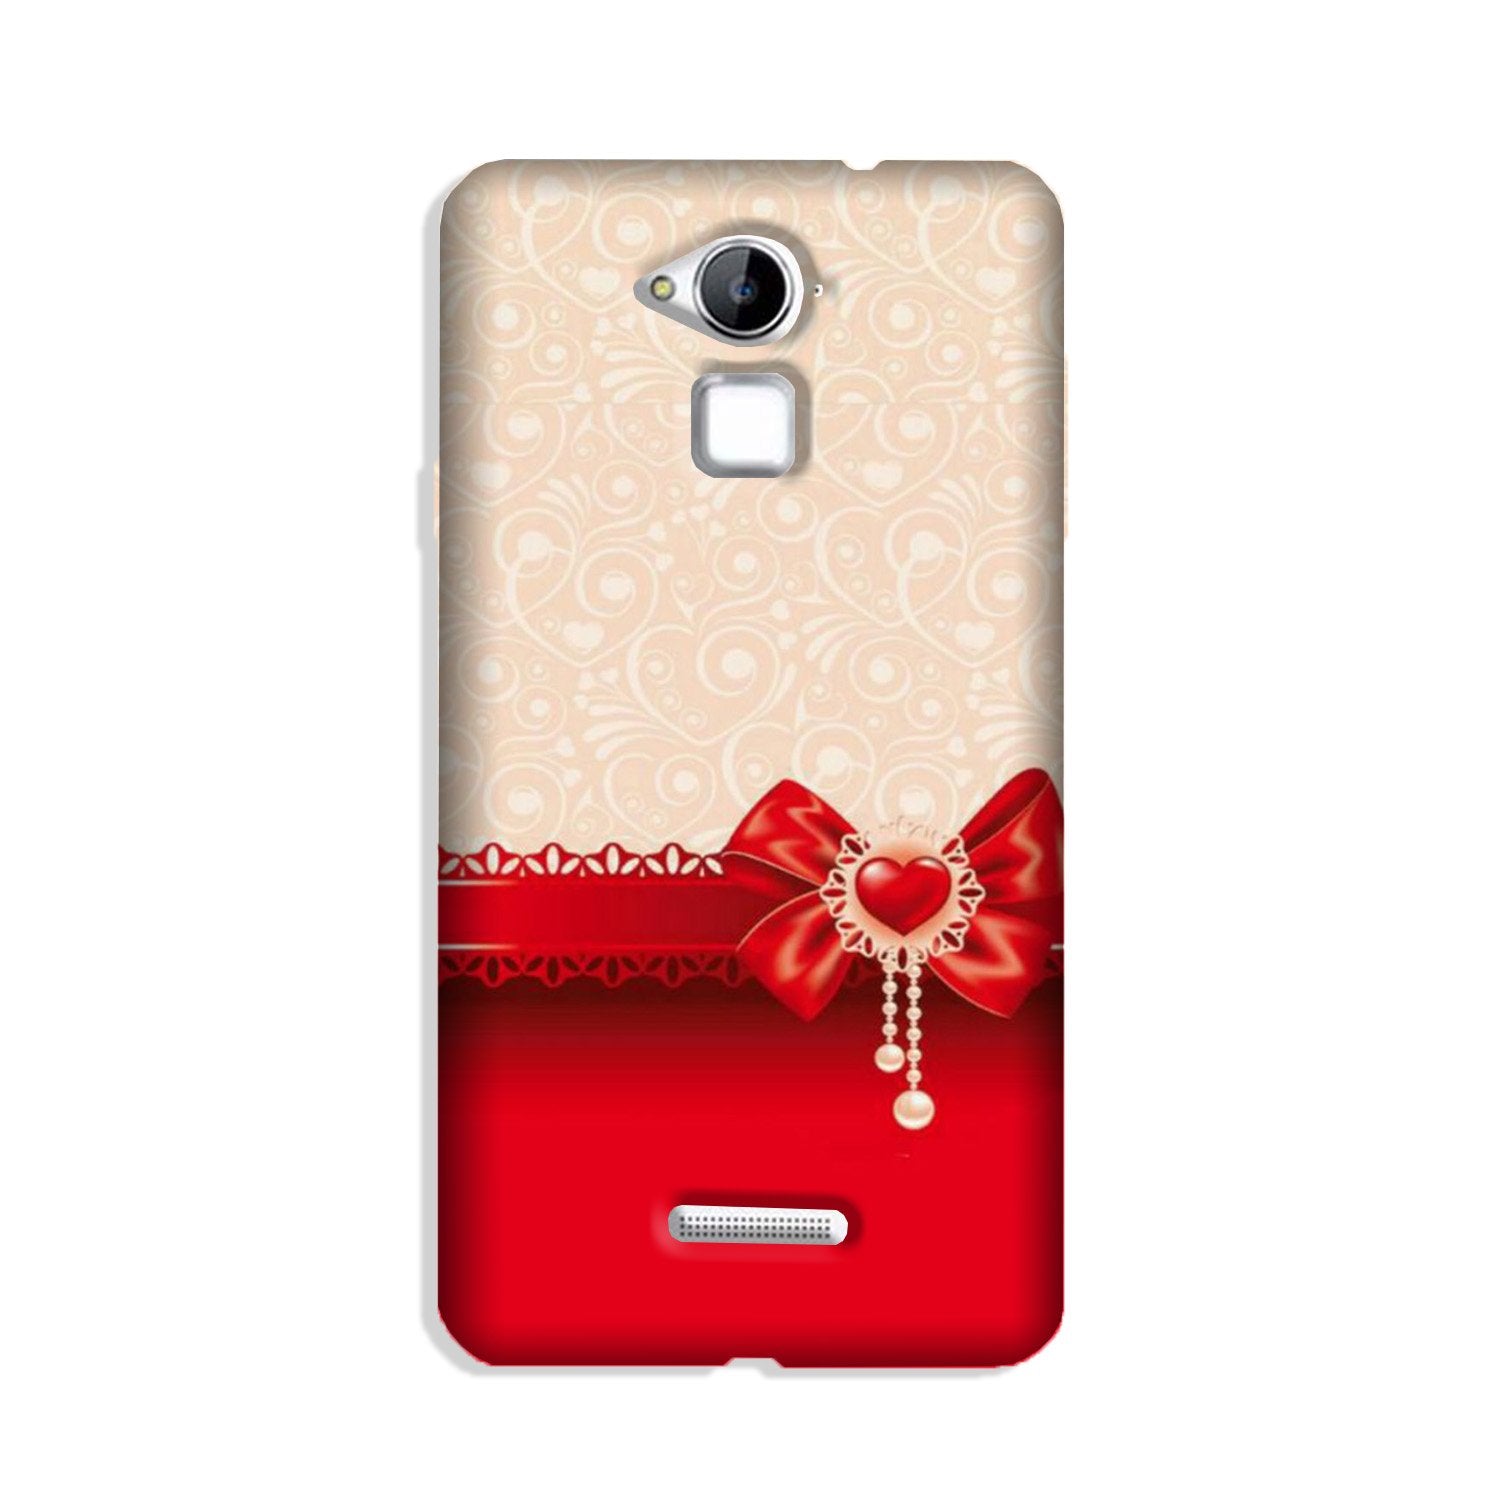 Gift Wrap3 Case for Coolpad Note 3